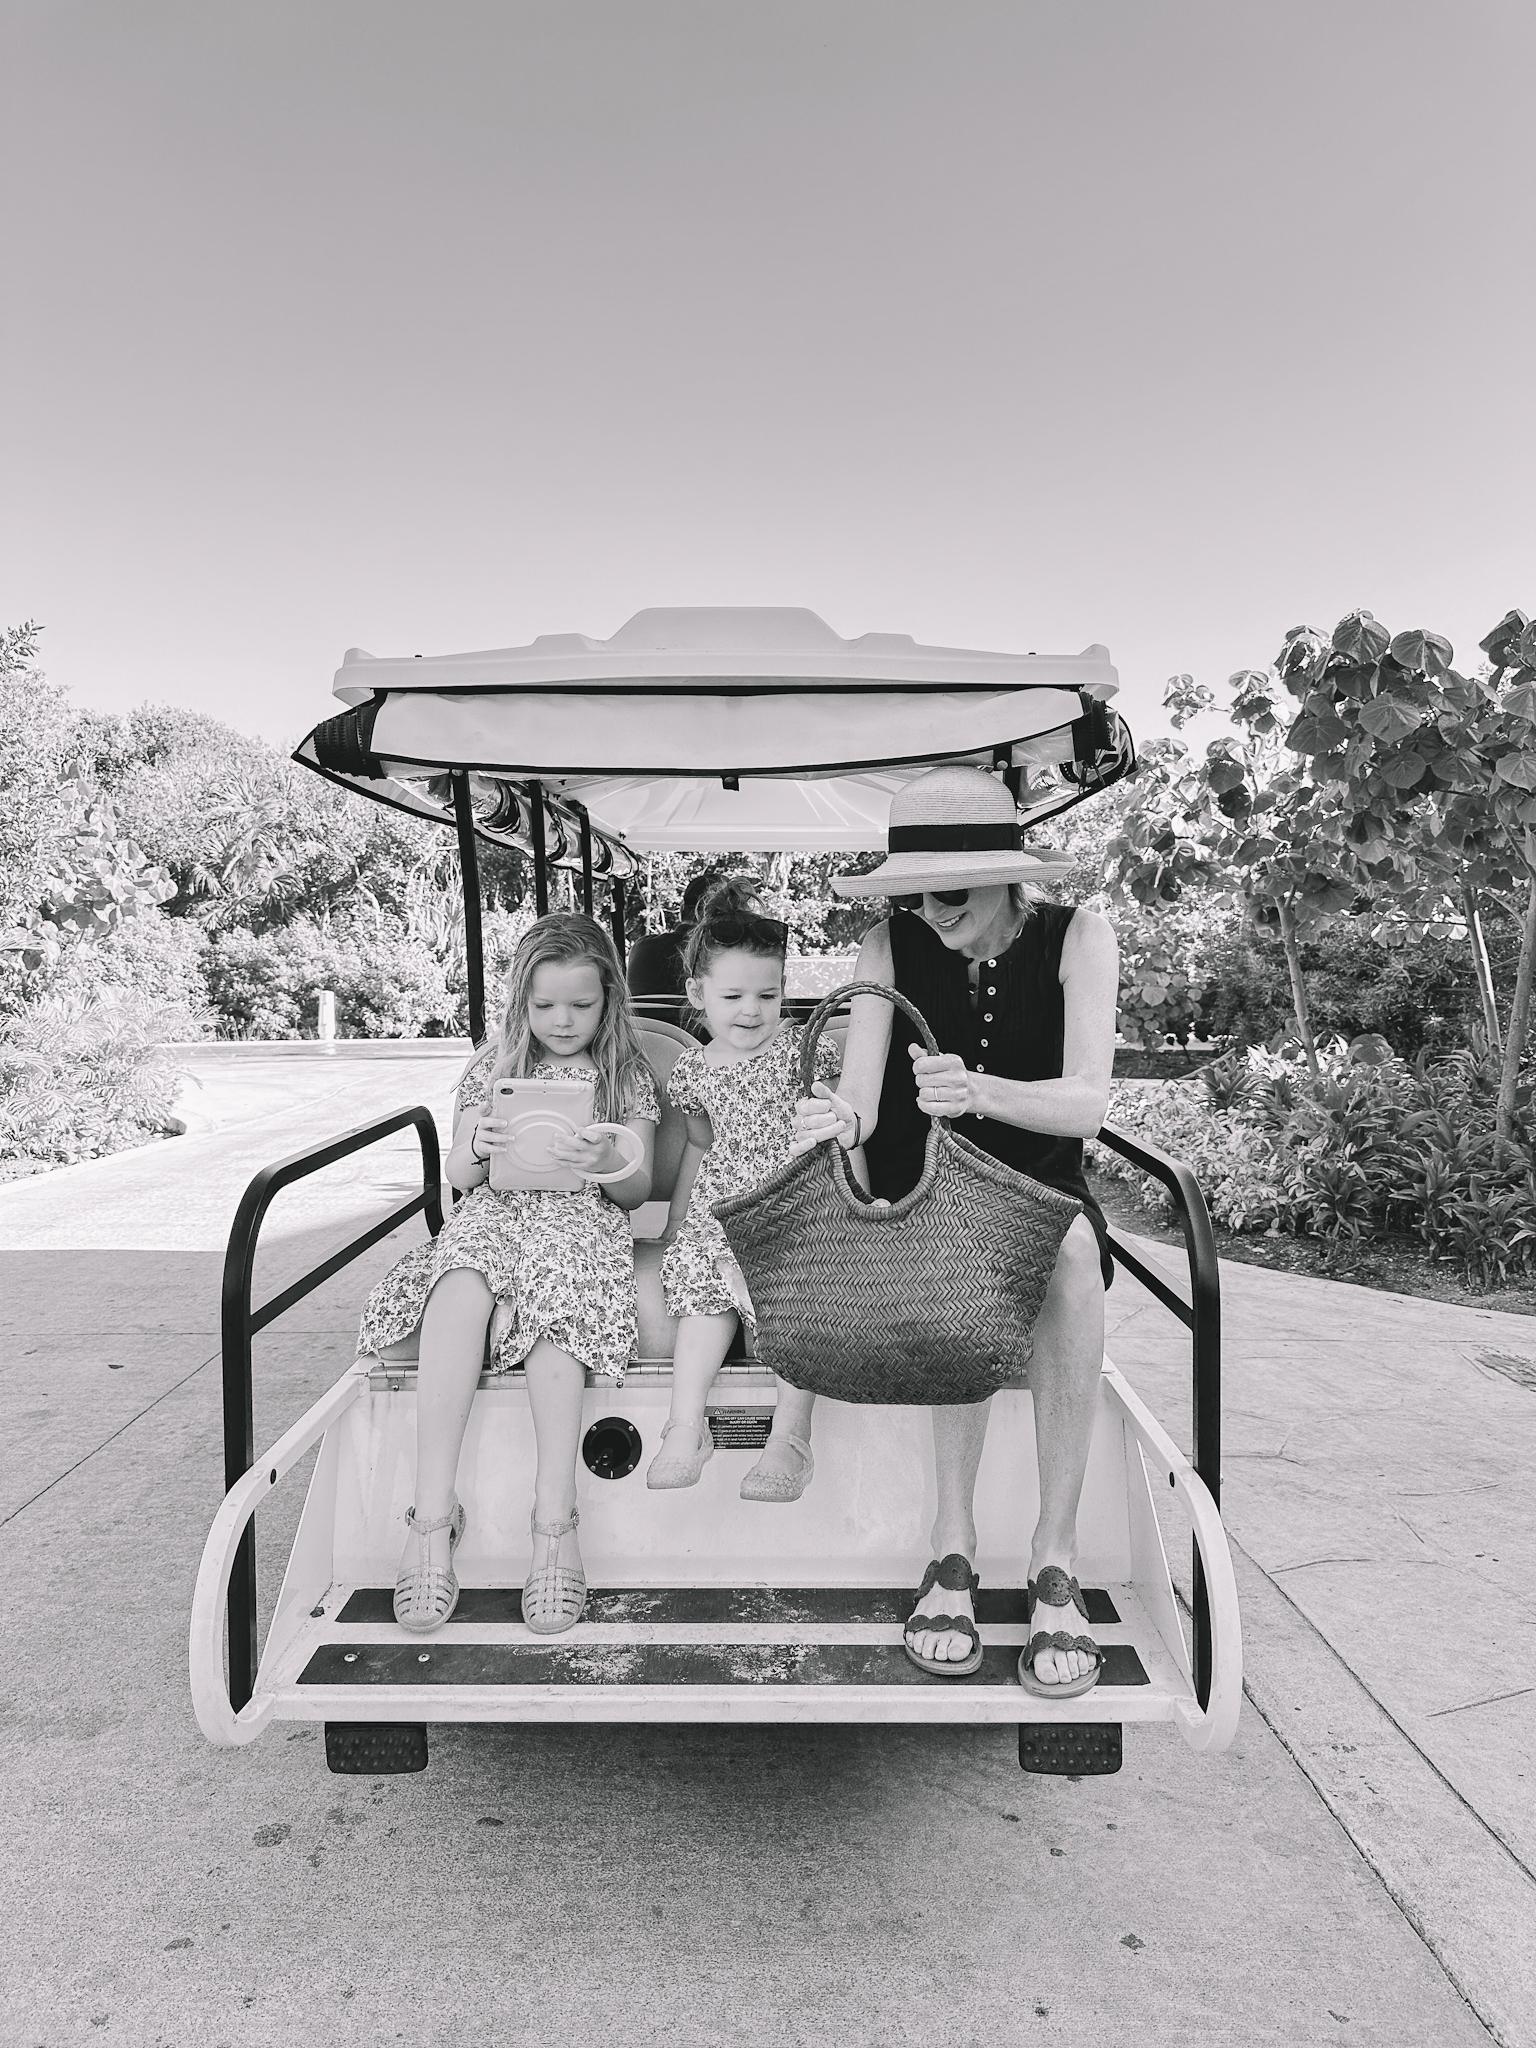 Kelly and kids in golf cart ride